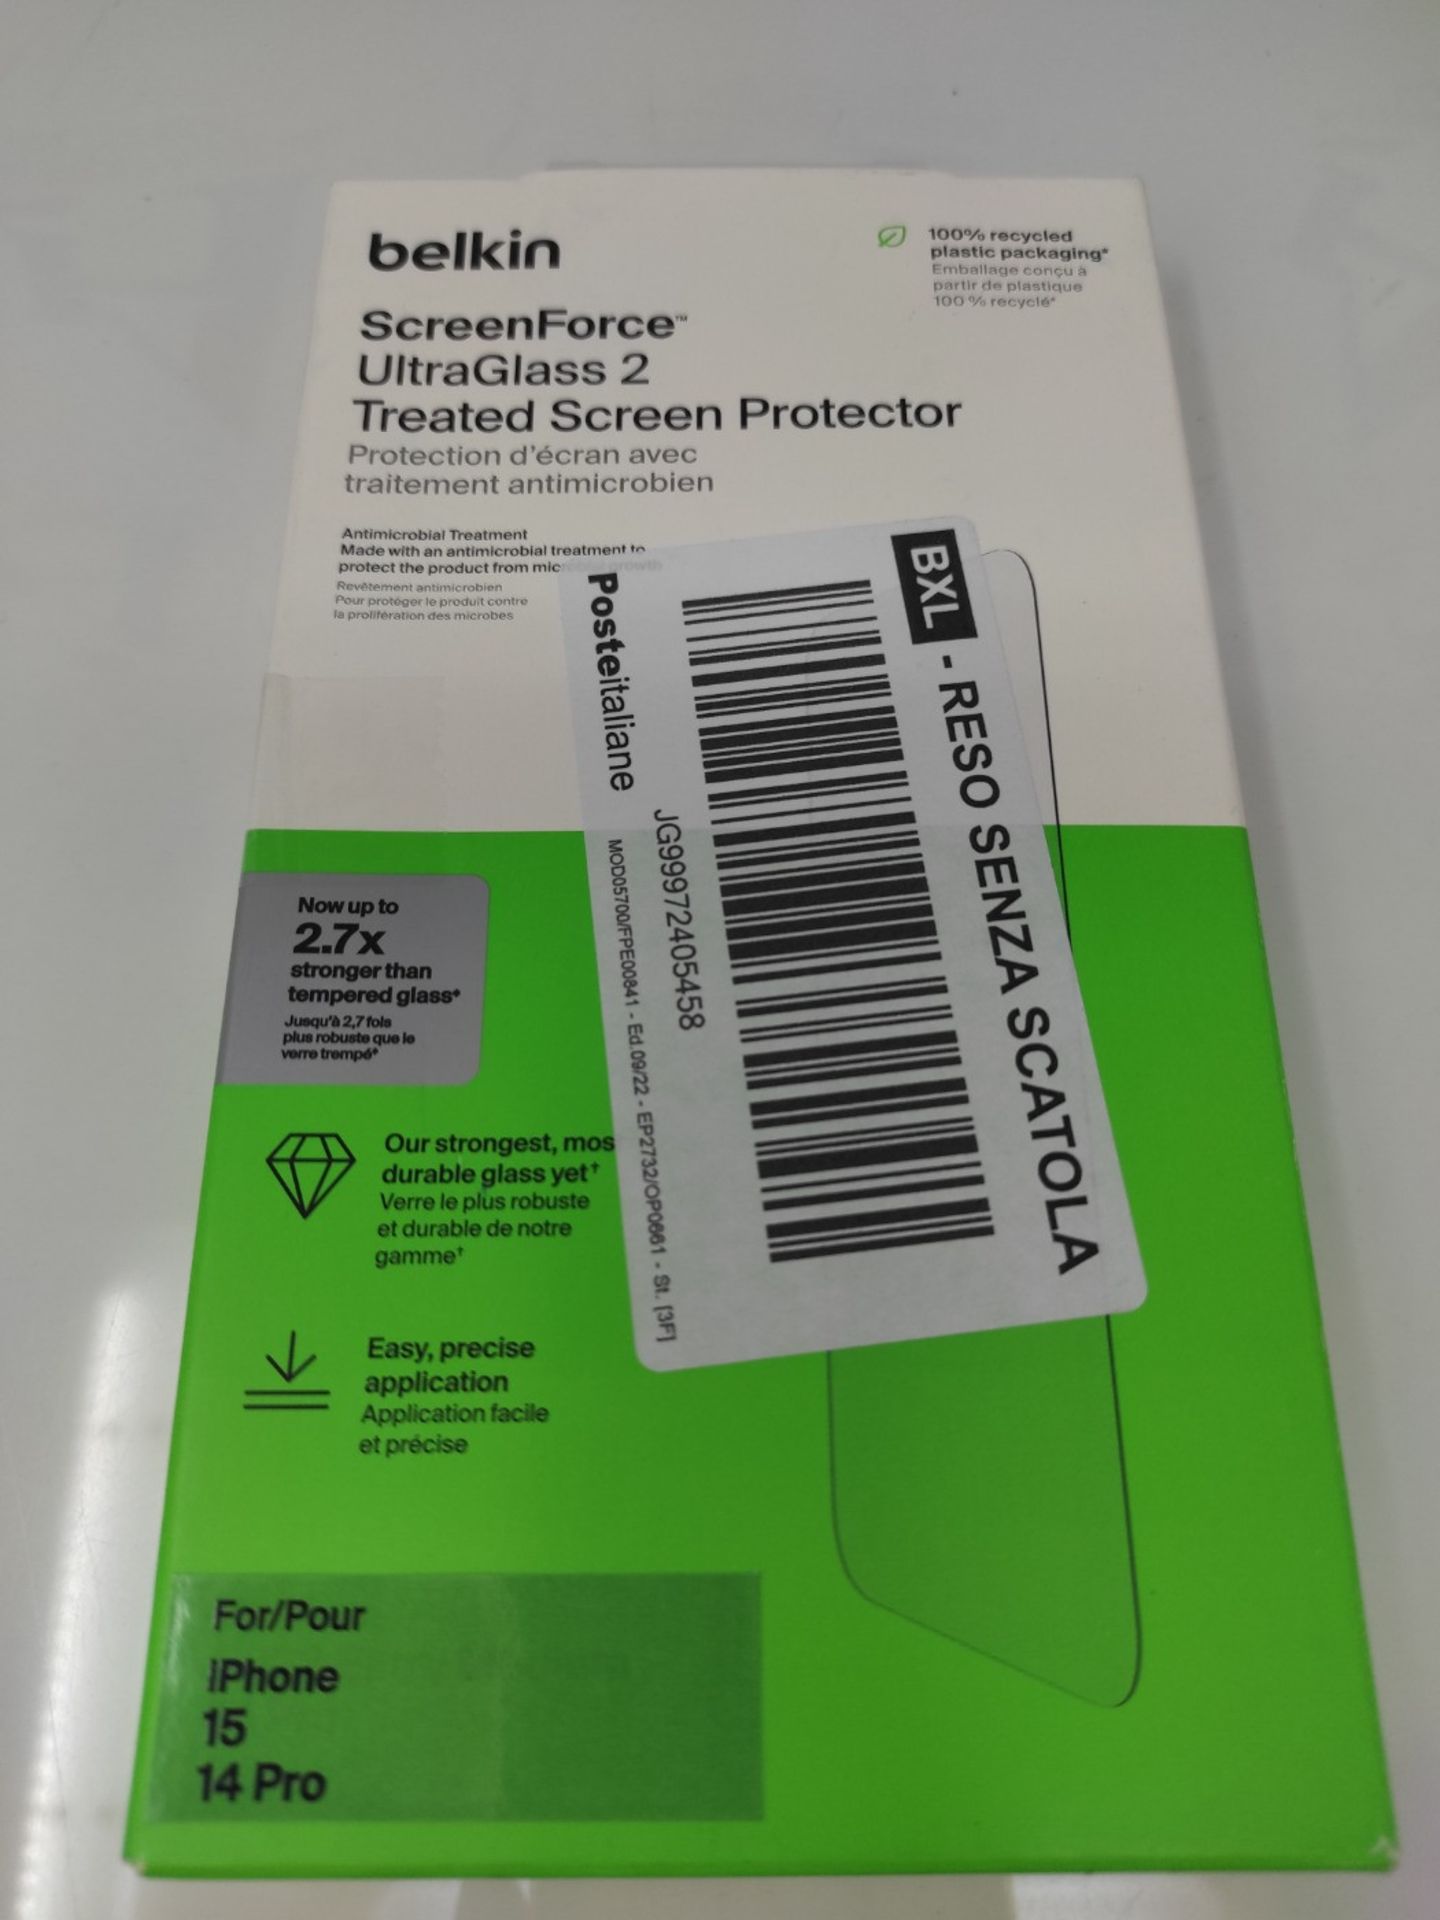 Belkin ScreenForce UltraGlass 2 Antimicrobial Screen Protector, glass for iPhone 15, s - Image 2 of 3